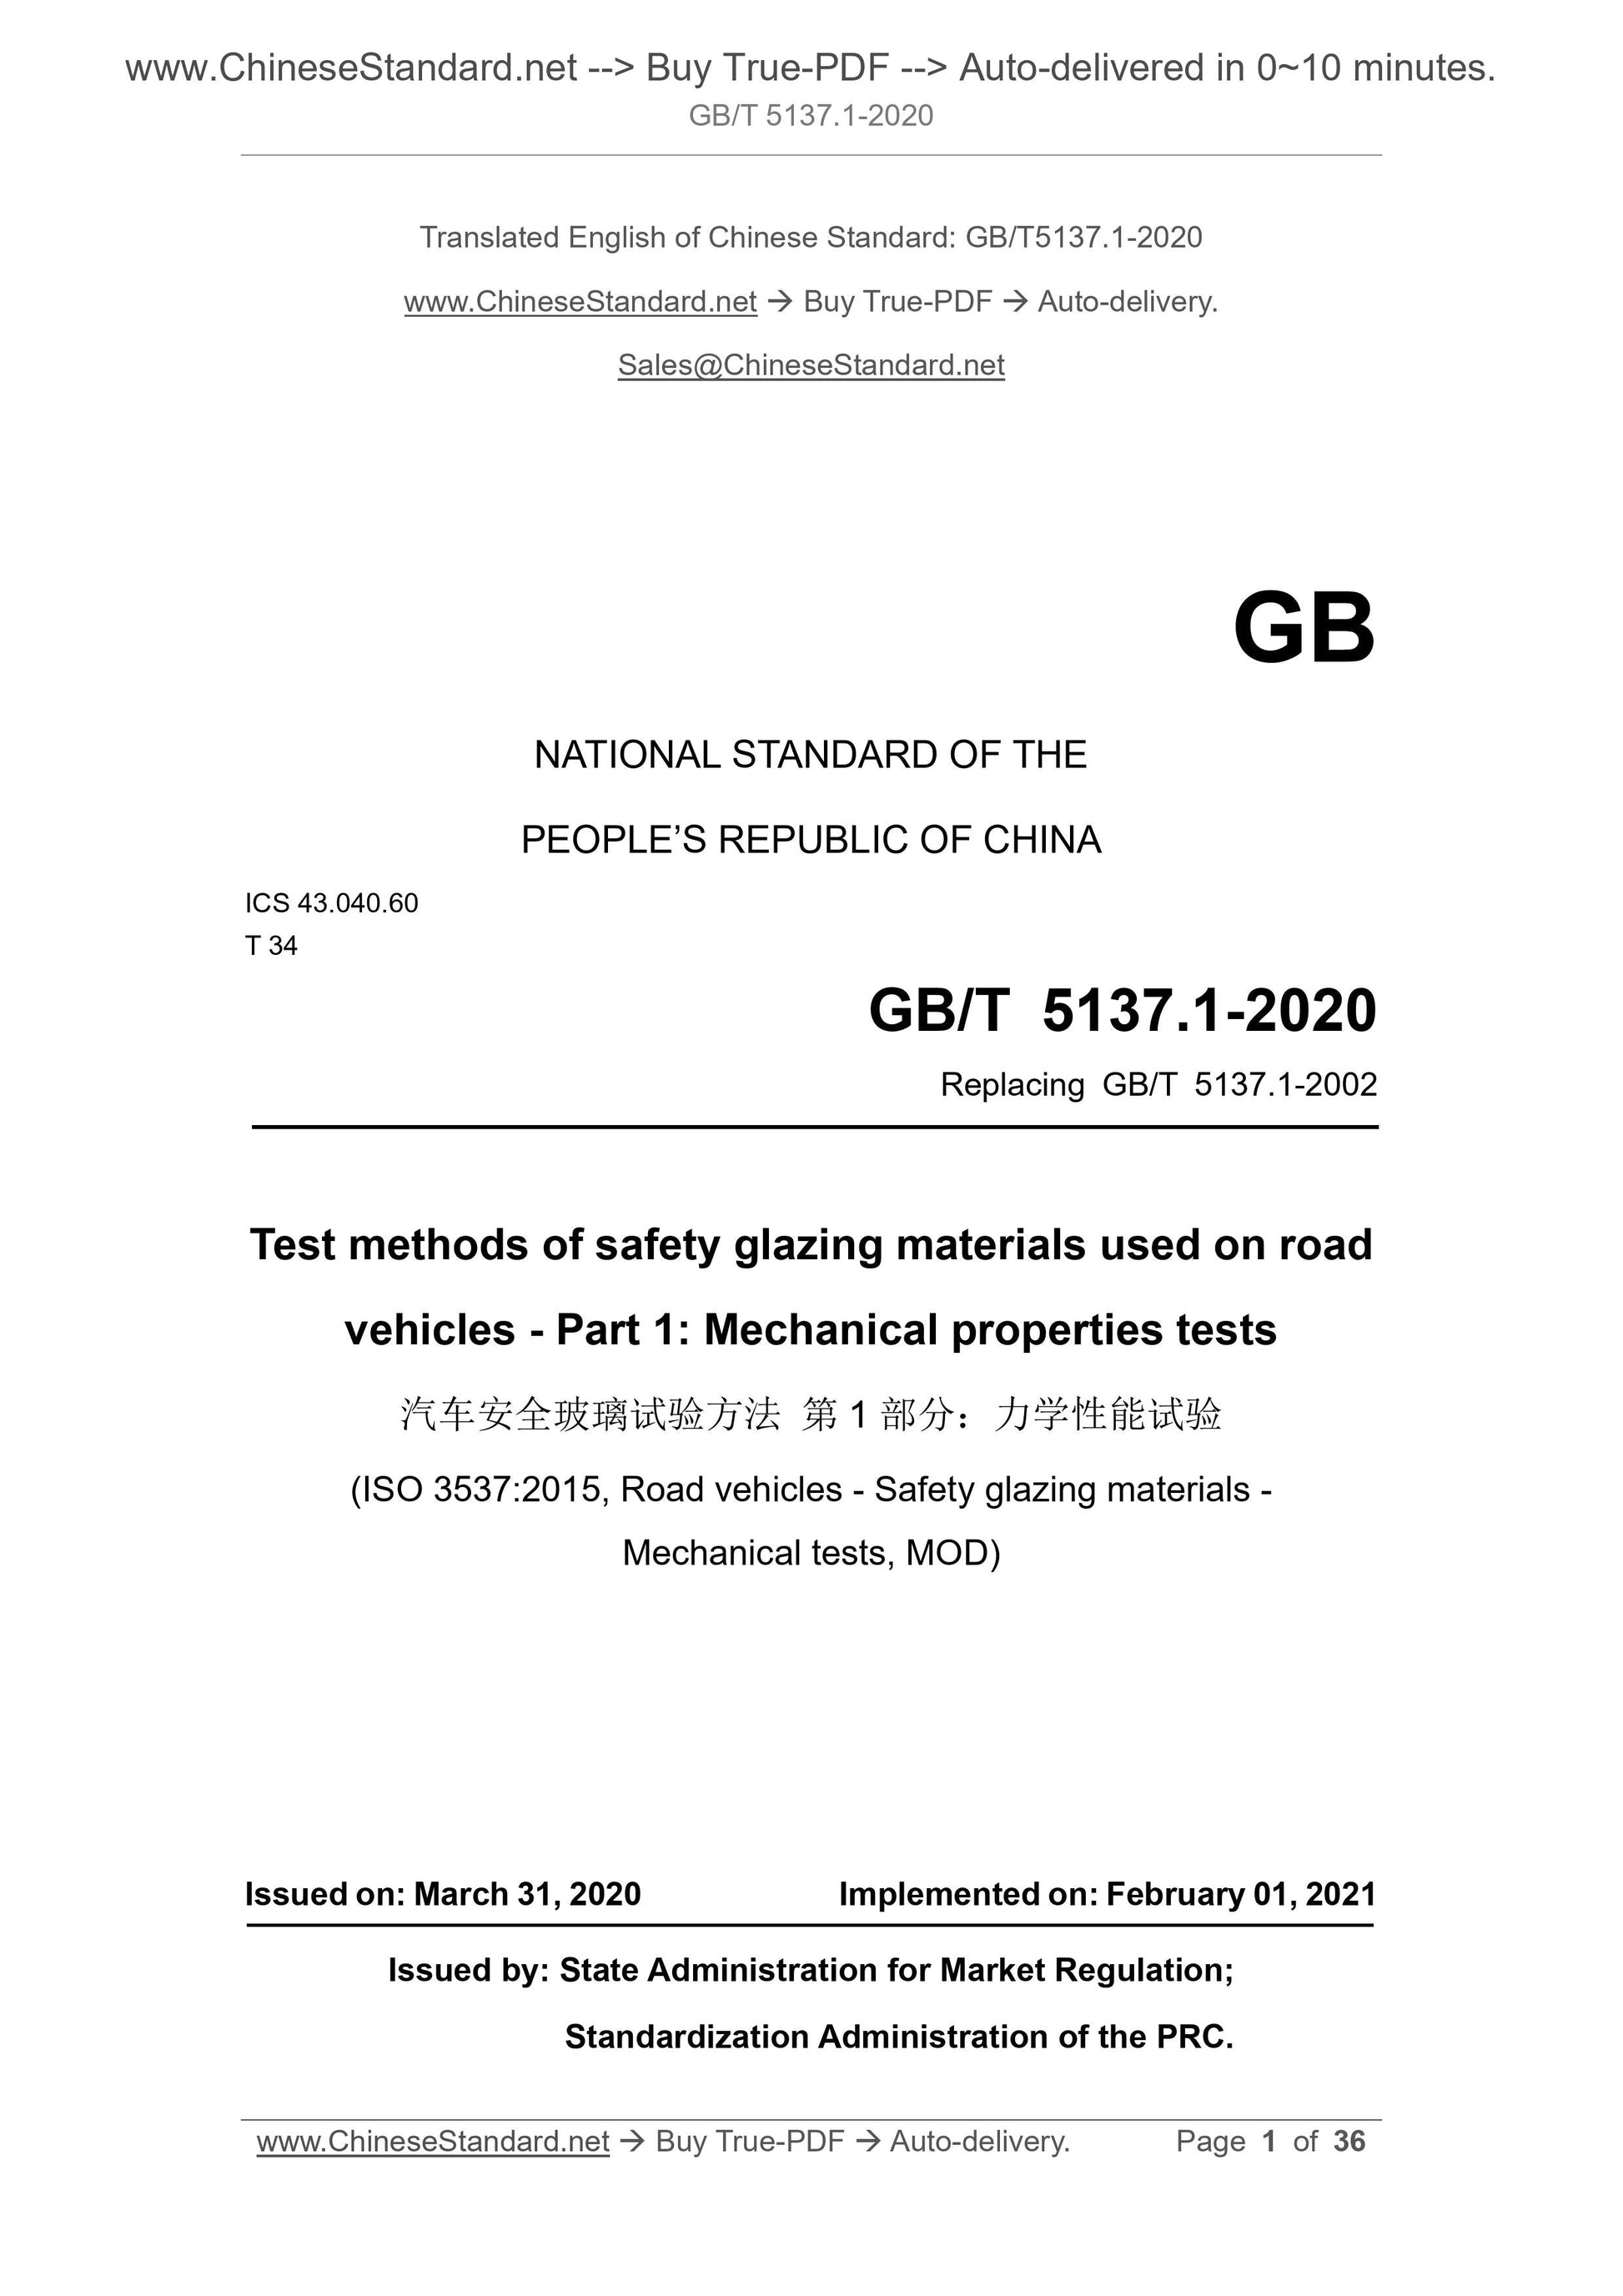 GB/T 5137.1-2020 Page 1